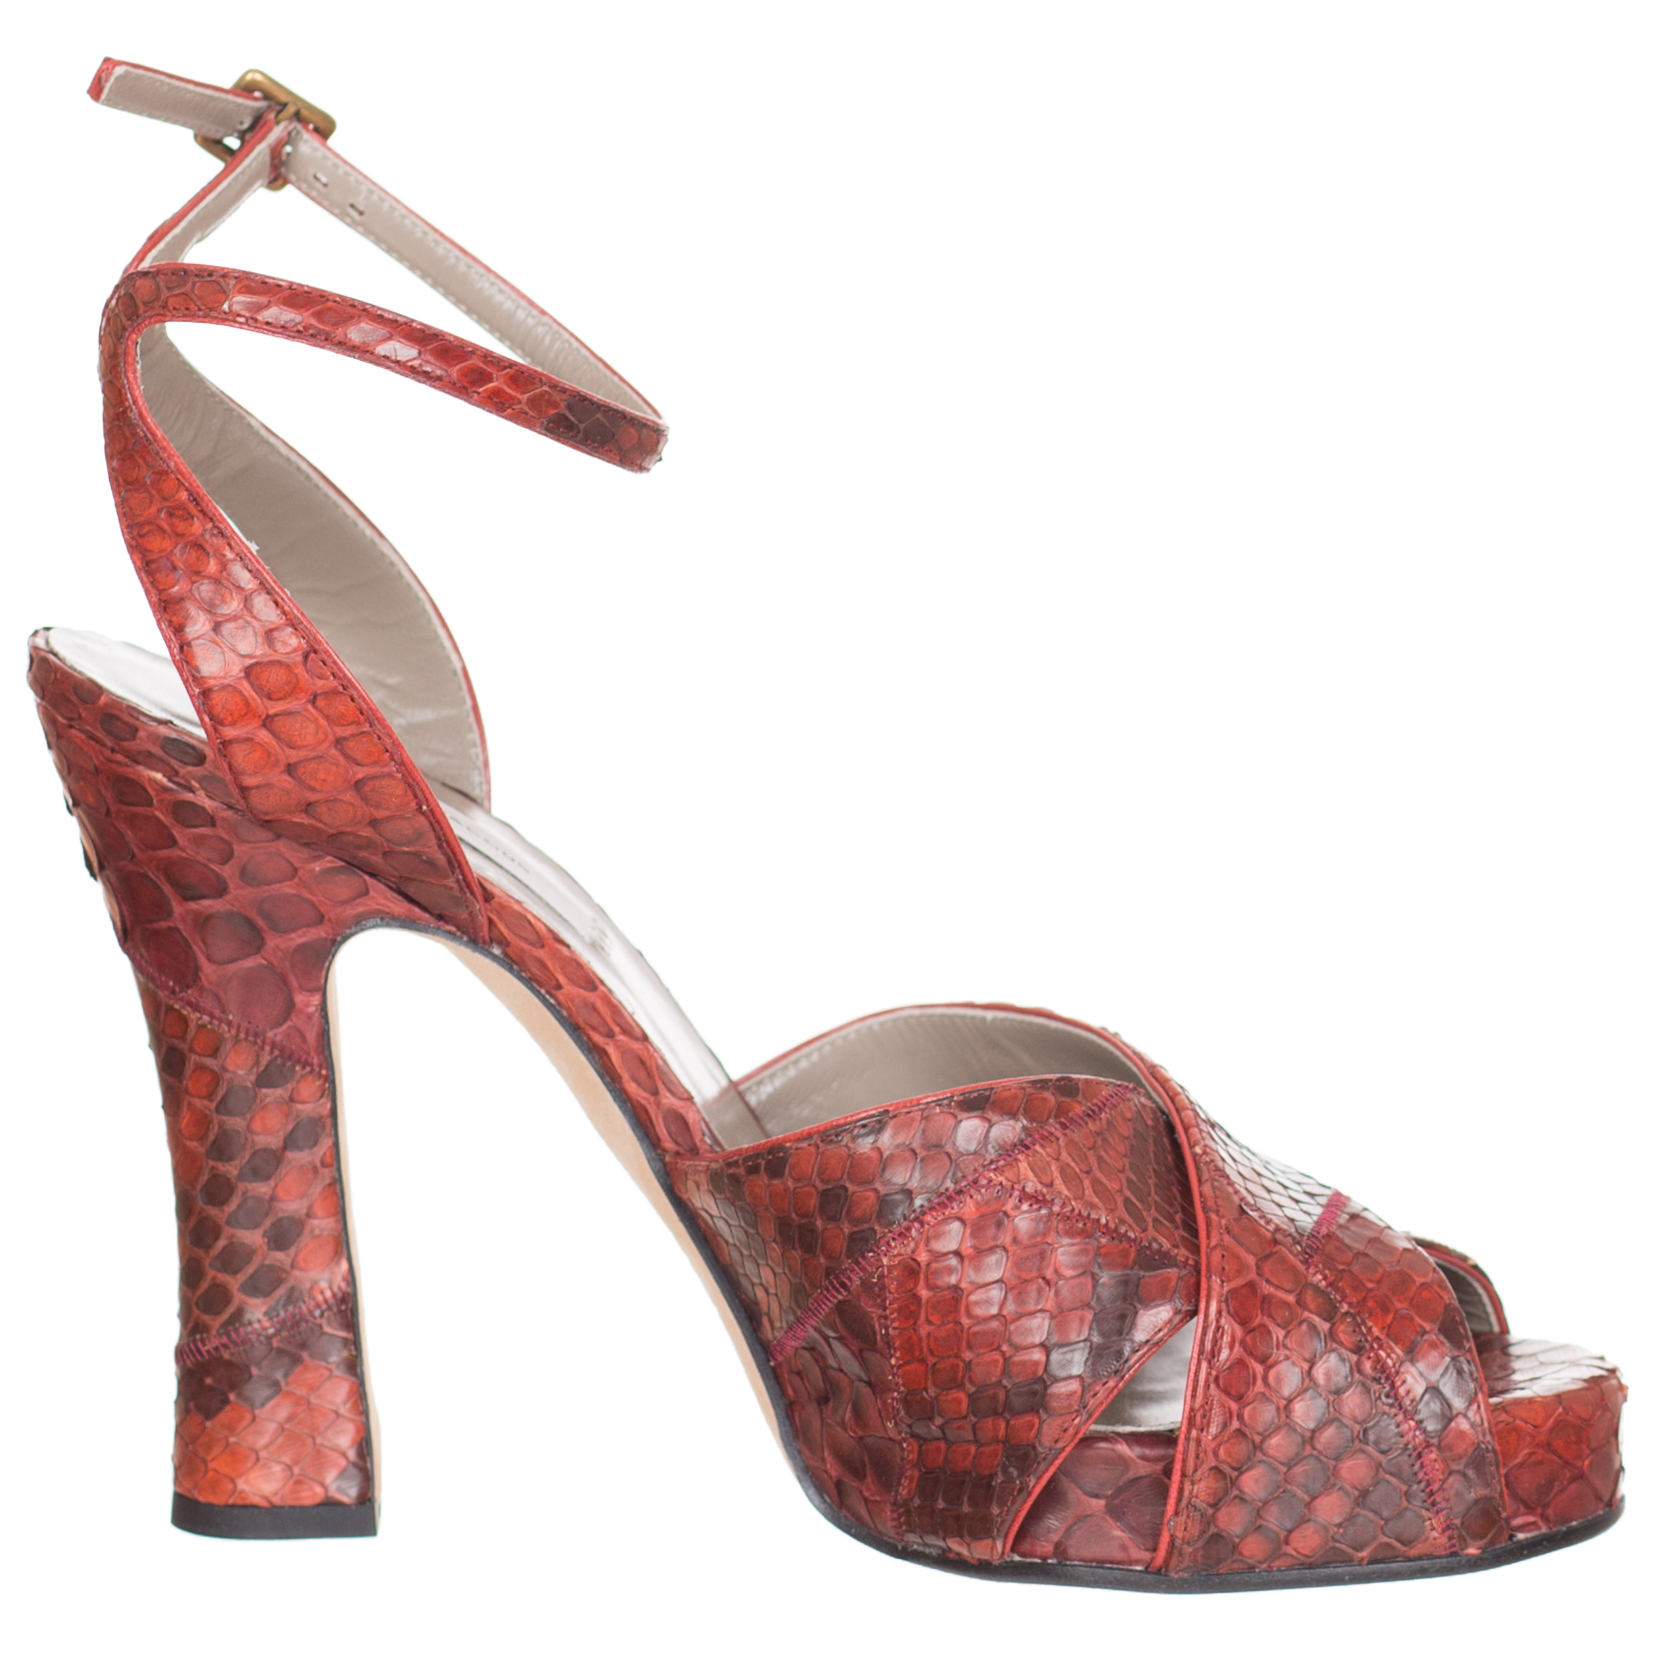 woocommerce-673321-2209615.cloudwaysapps.com-marc-jacobs-womens-red-python-snake-skin-ankle-strap-sandals-heels-shoes